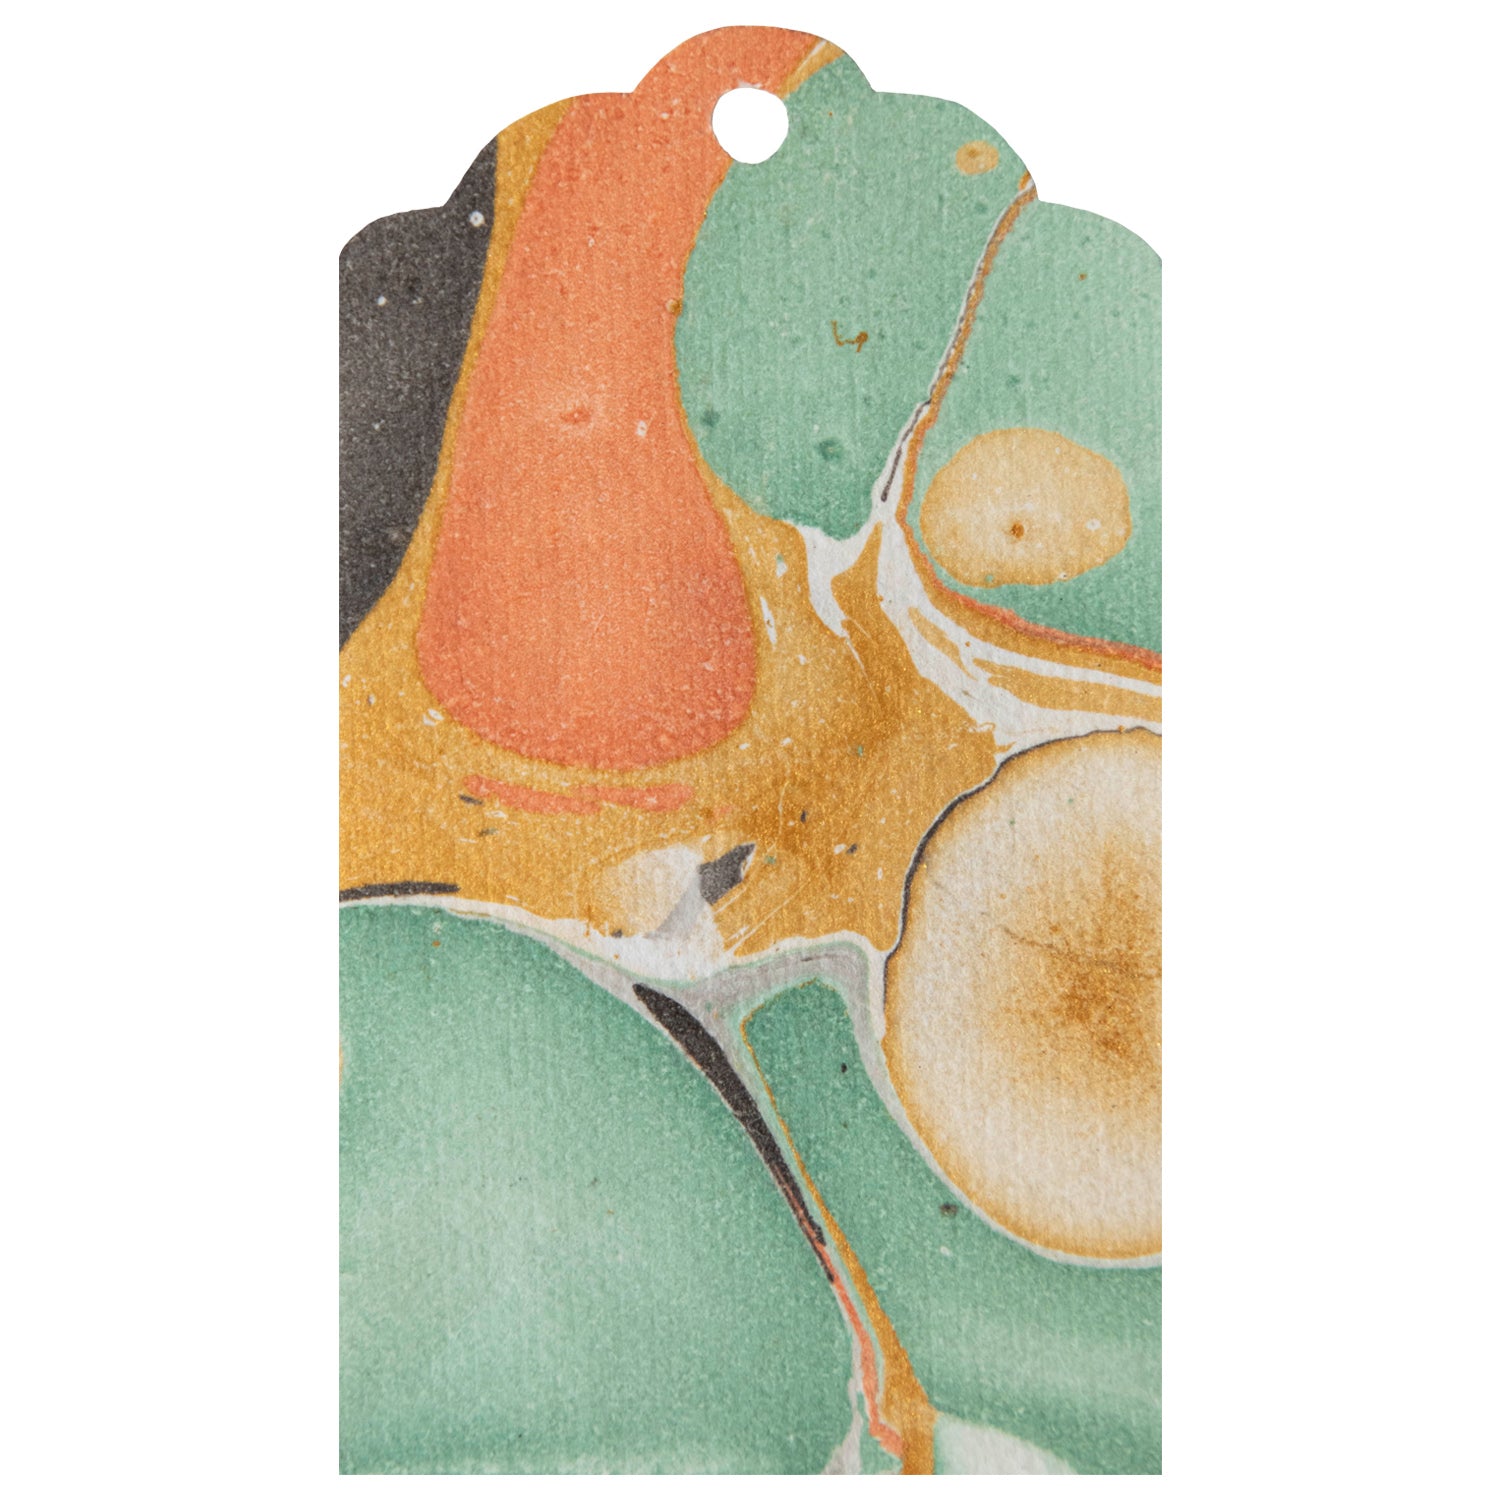 A green, orange, and yellow Stone Marbled Gift Tag with a unique finishing touch by Hester &amp; Cook.